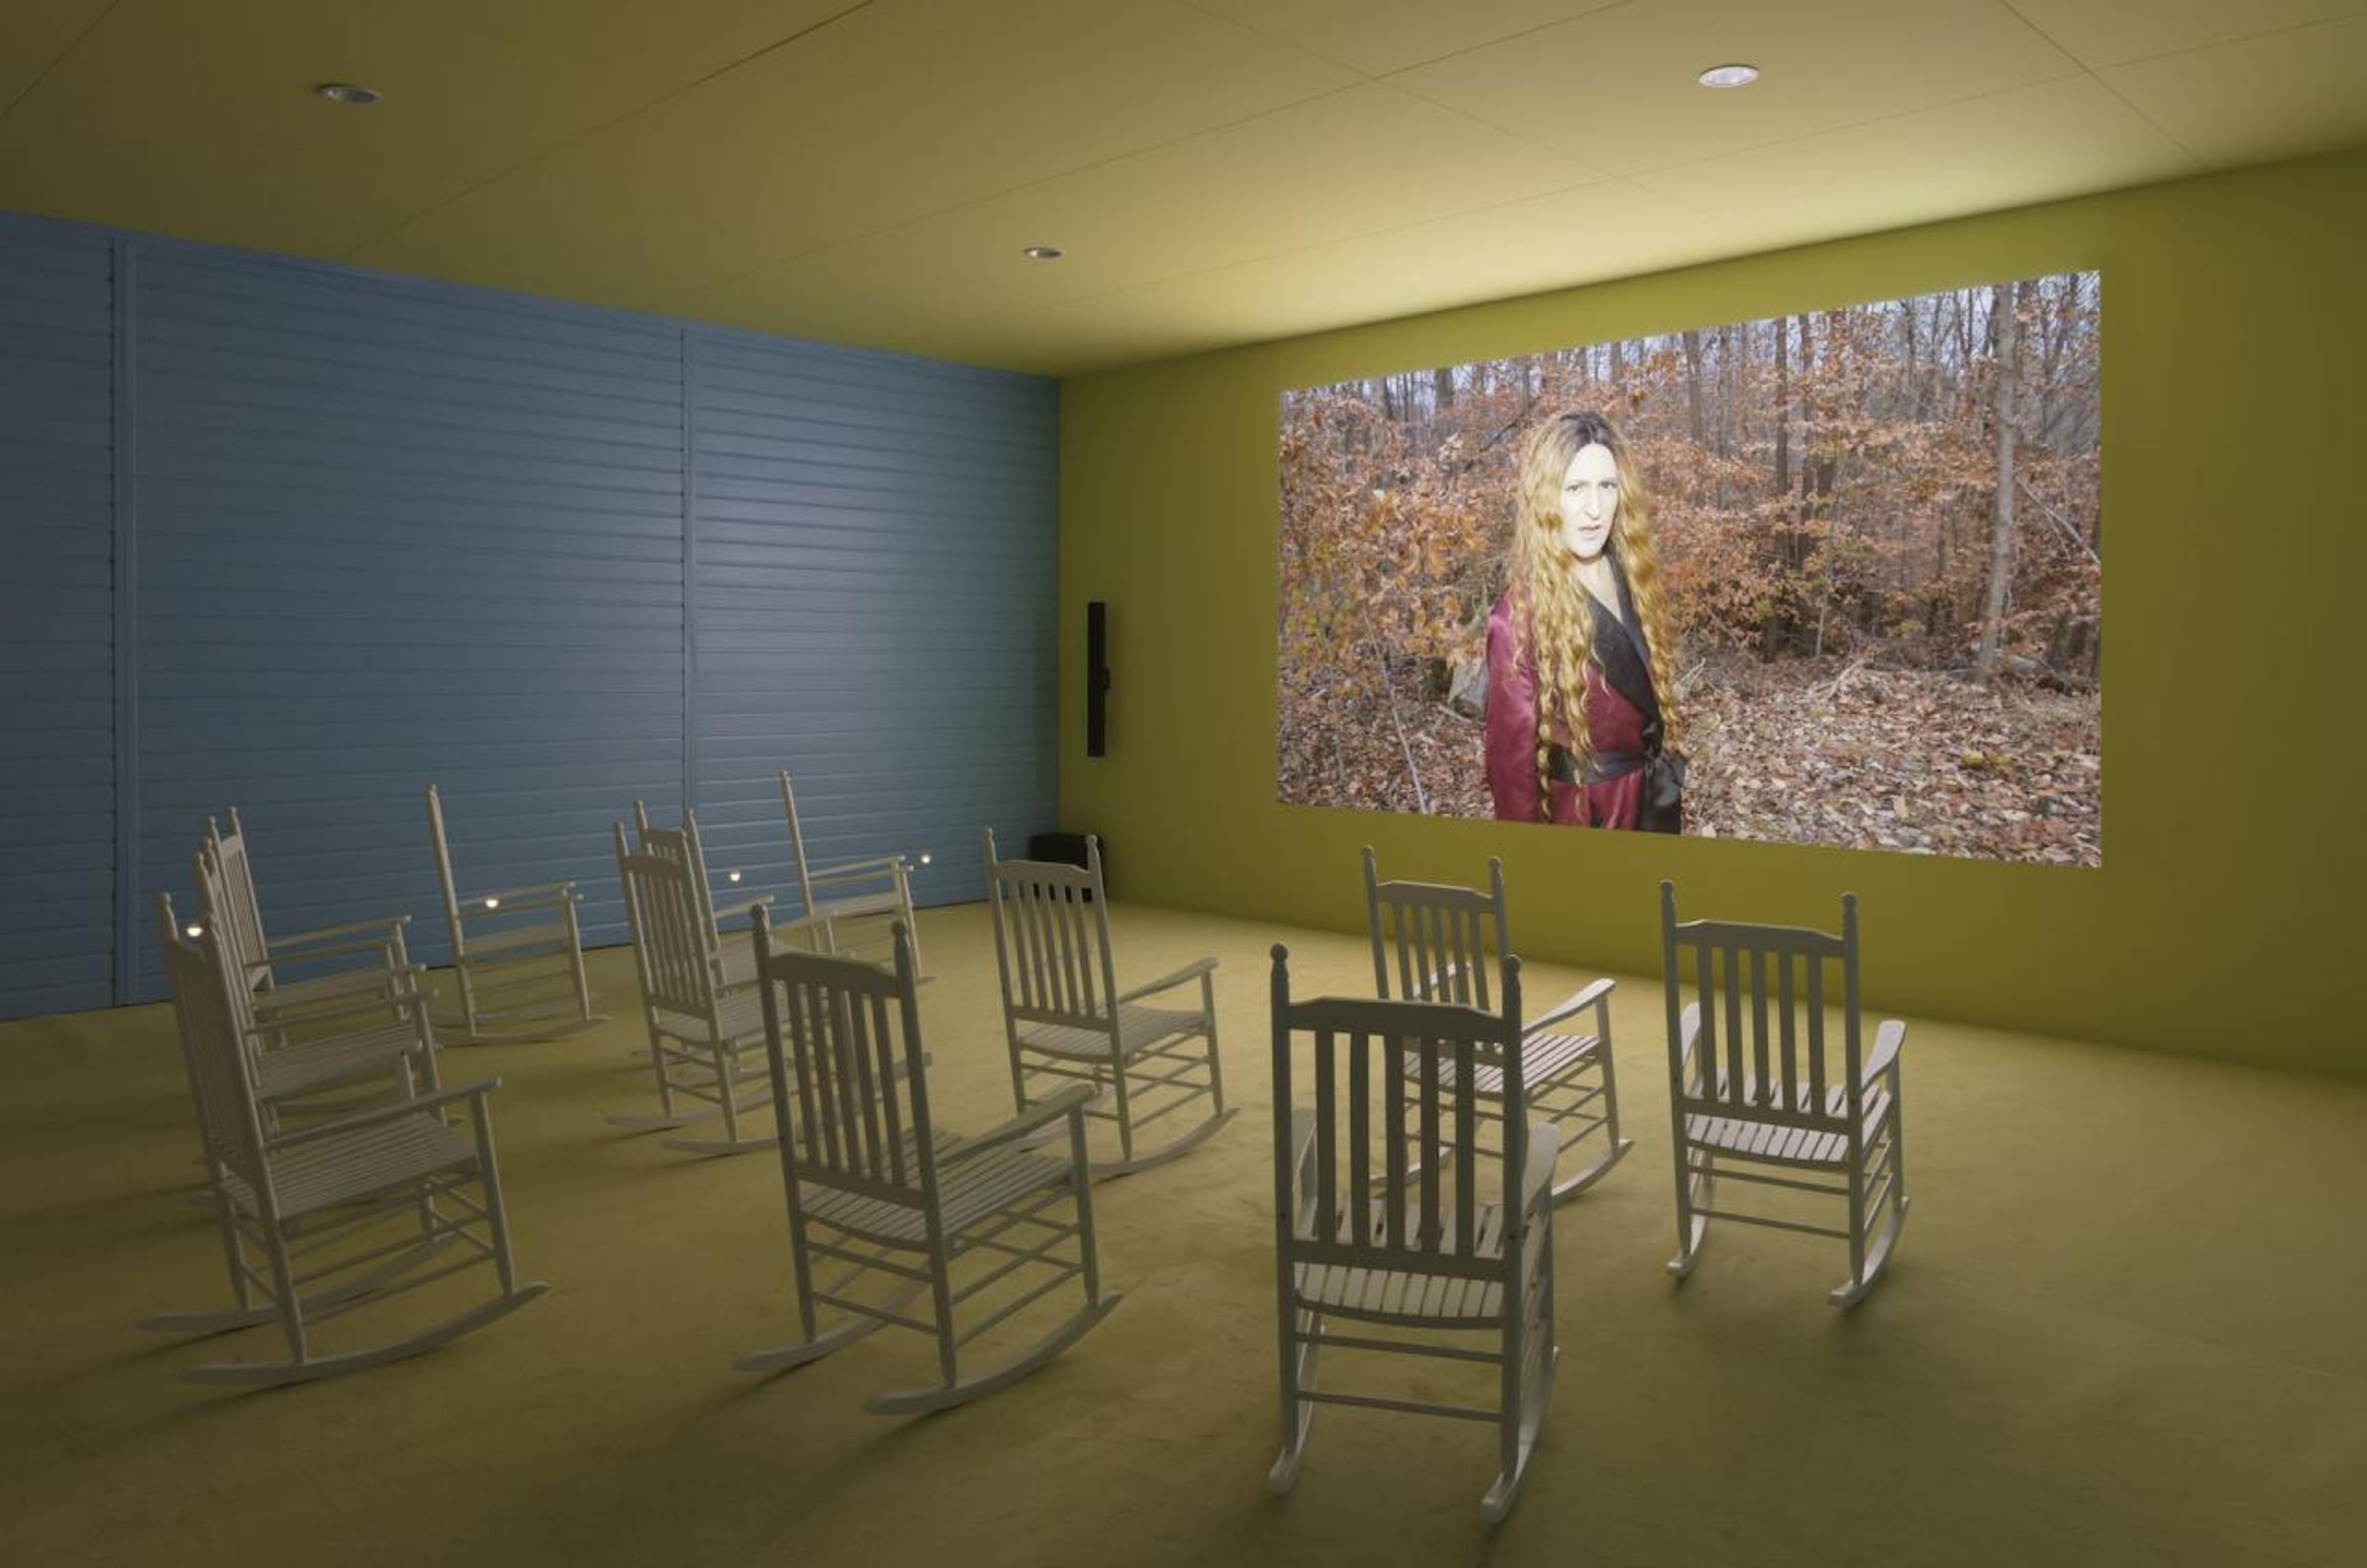 Exhibition view of &ldquo;Lizzie Fitch | Ryan Trecartin: Whether Line&rdquo;, Fondazione Prada, 2019 Photo Andrea Rossetti, Courtesy Fondazione Prada Lizzie Fitch | Ryan Trecartin Plot Front, 2019 4K video, color, sound, 1hr 45min approx. Wood, sheet metal, carpet, perforated metal acoustical panels, drywall, paint, PVC siding, bituminous sheath, rockers, lights, ambient sound